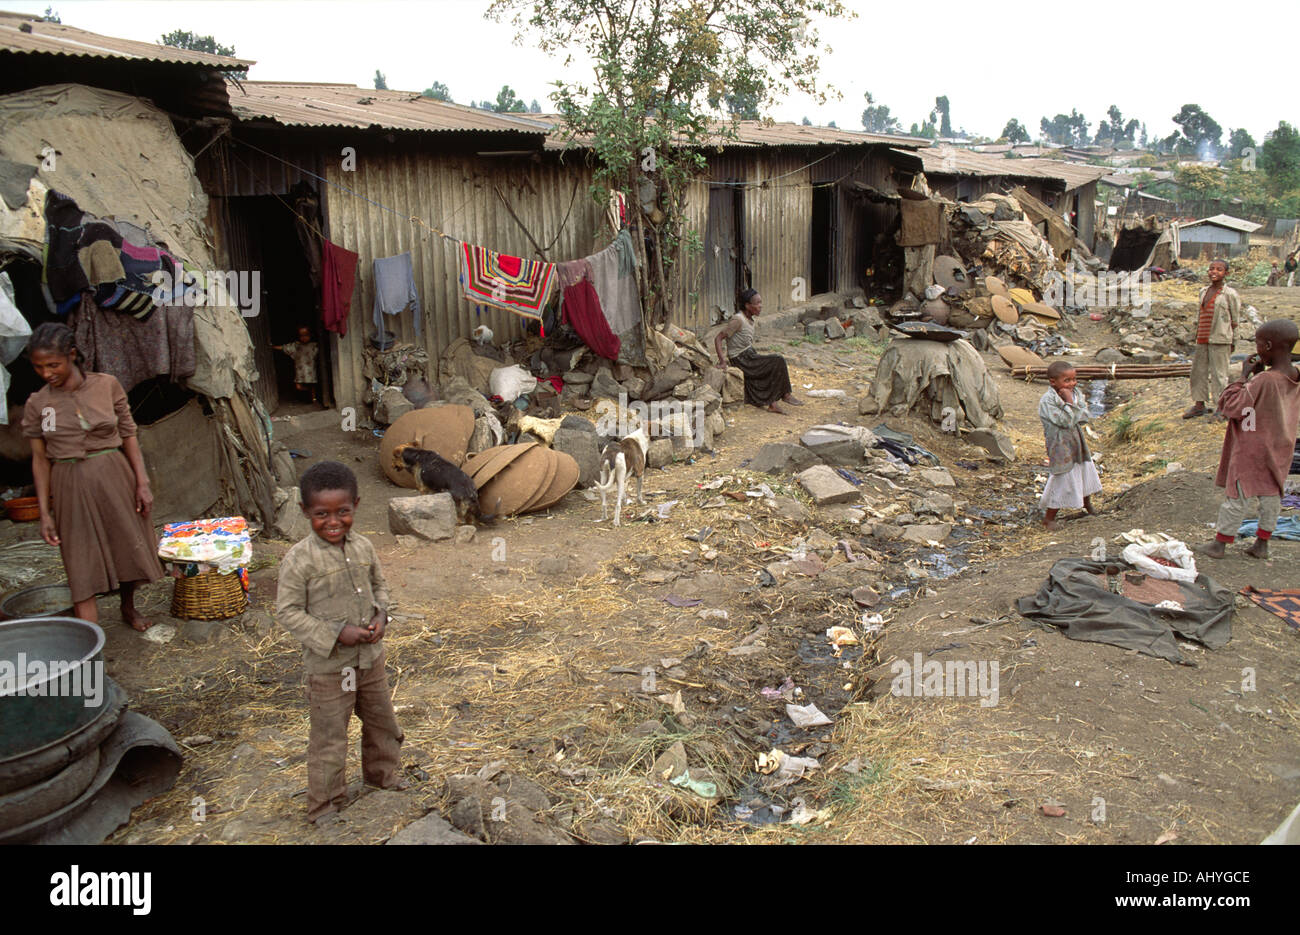 Open sewers and poor housing in a slum area of Addis Ababa. Ethiopia Stock Photo